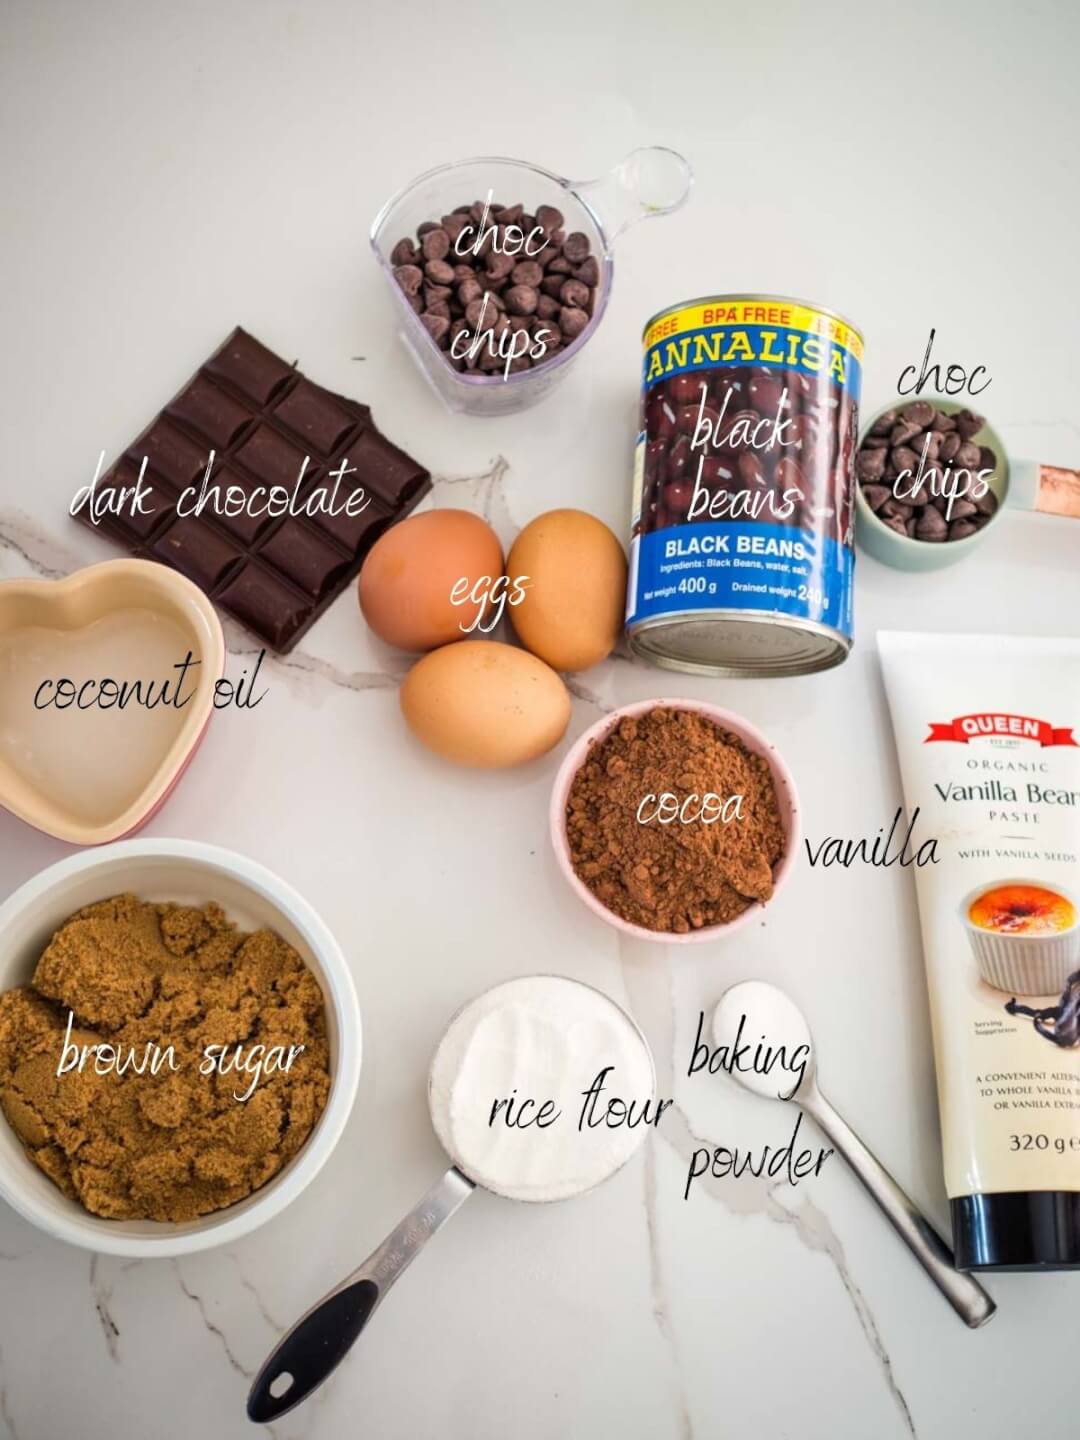 ingredients for chocolate brownies: chocolate chips, chocolate, cocoa, rice flour, black beans, eggs, vanilla, baking powder, brown sugar coconut oil